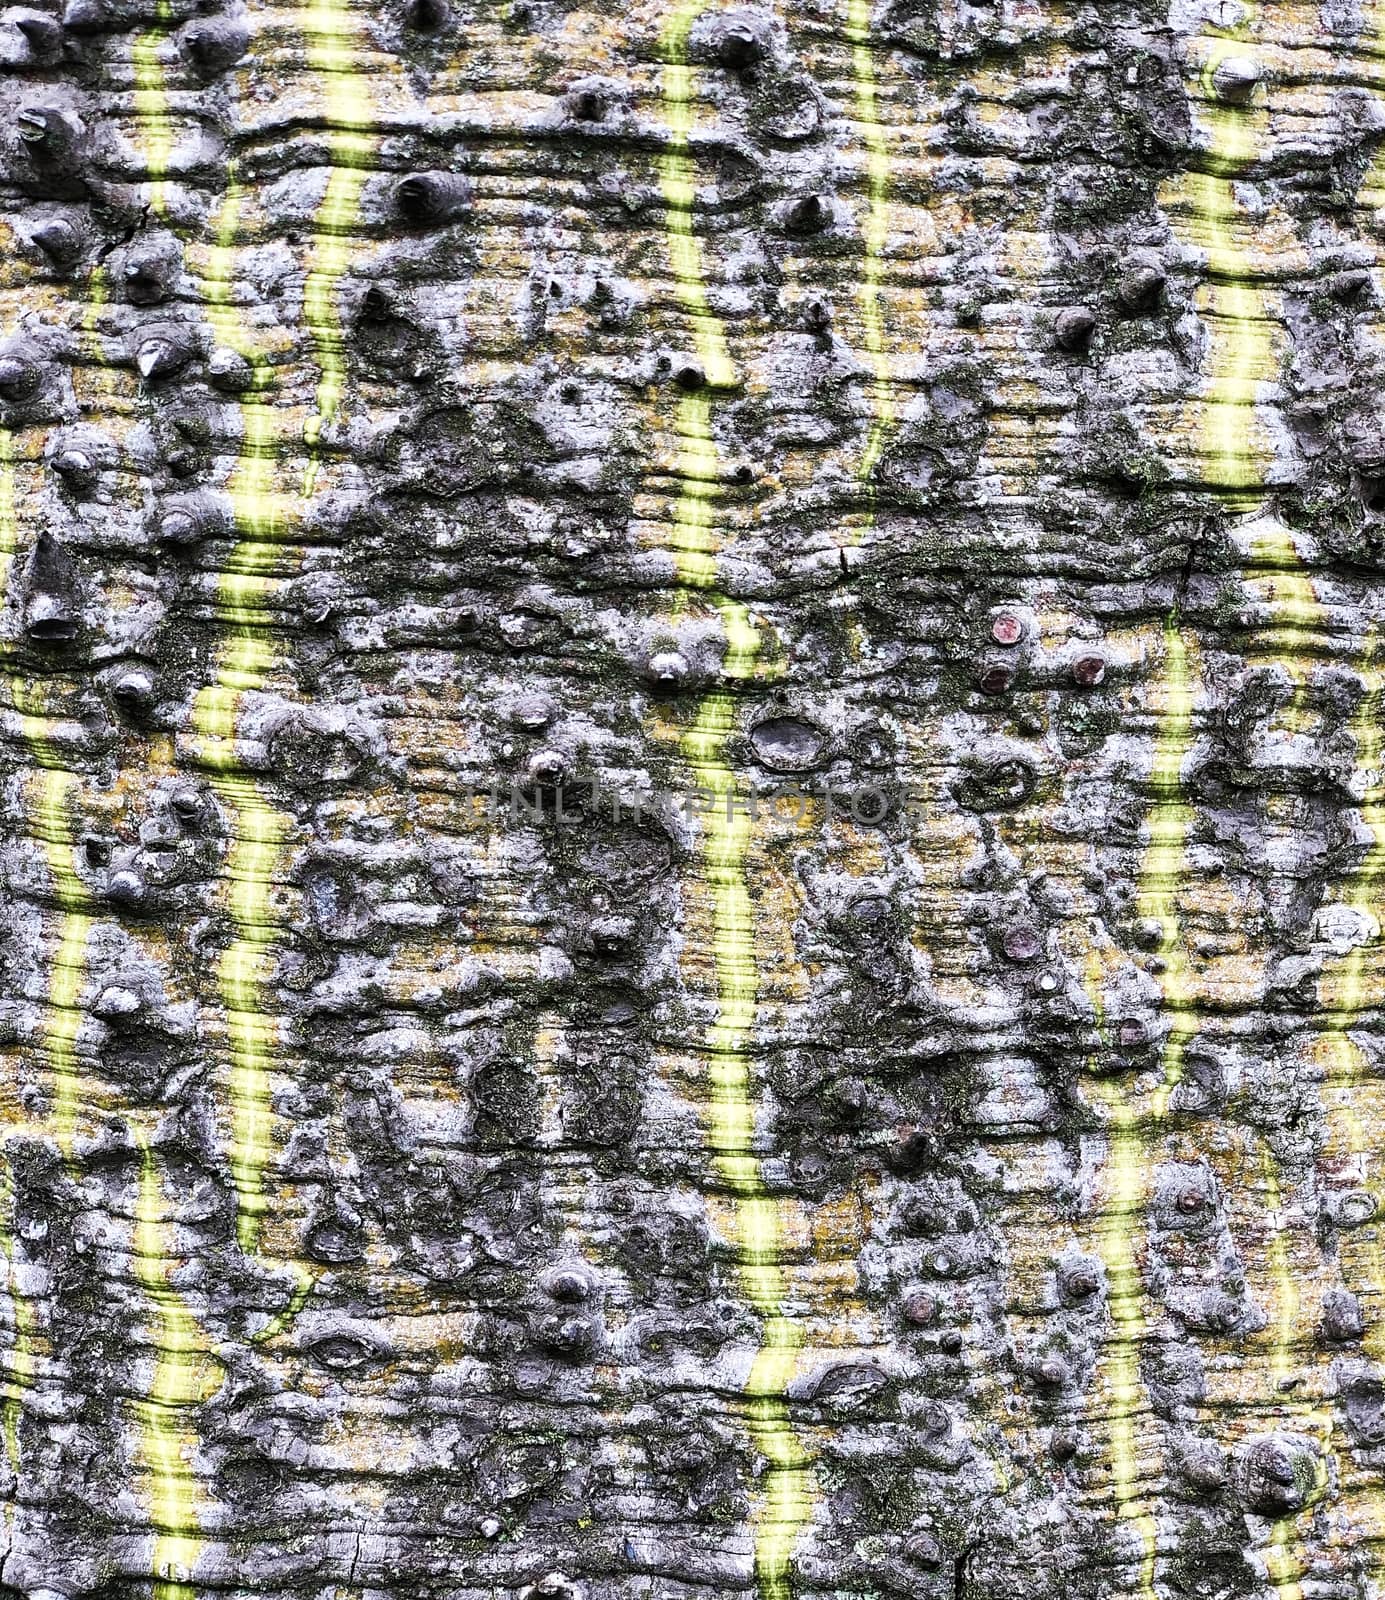 Tree bark texture closeup shot for a background